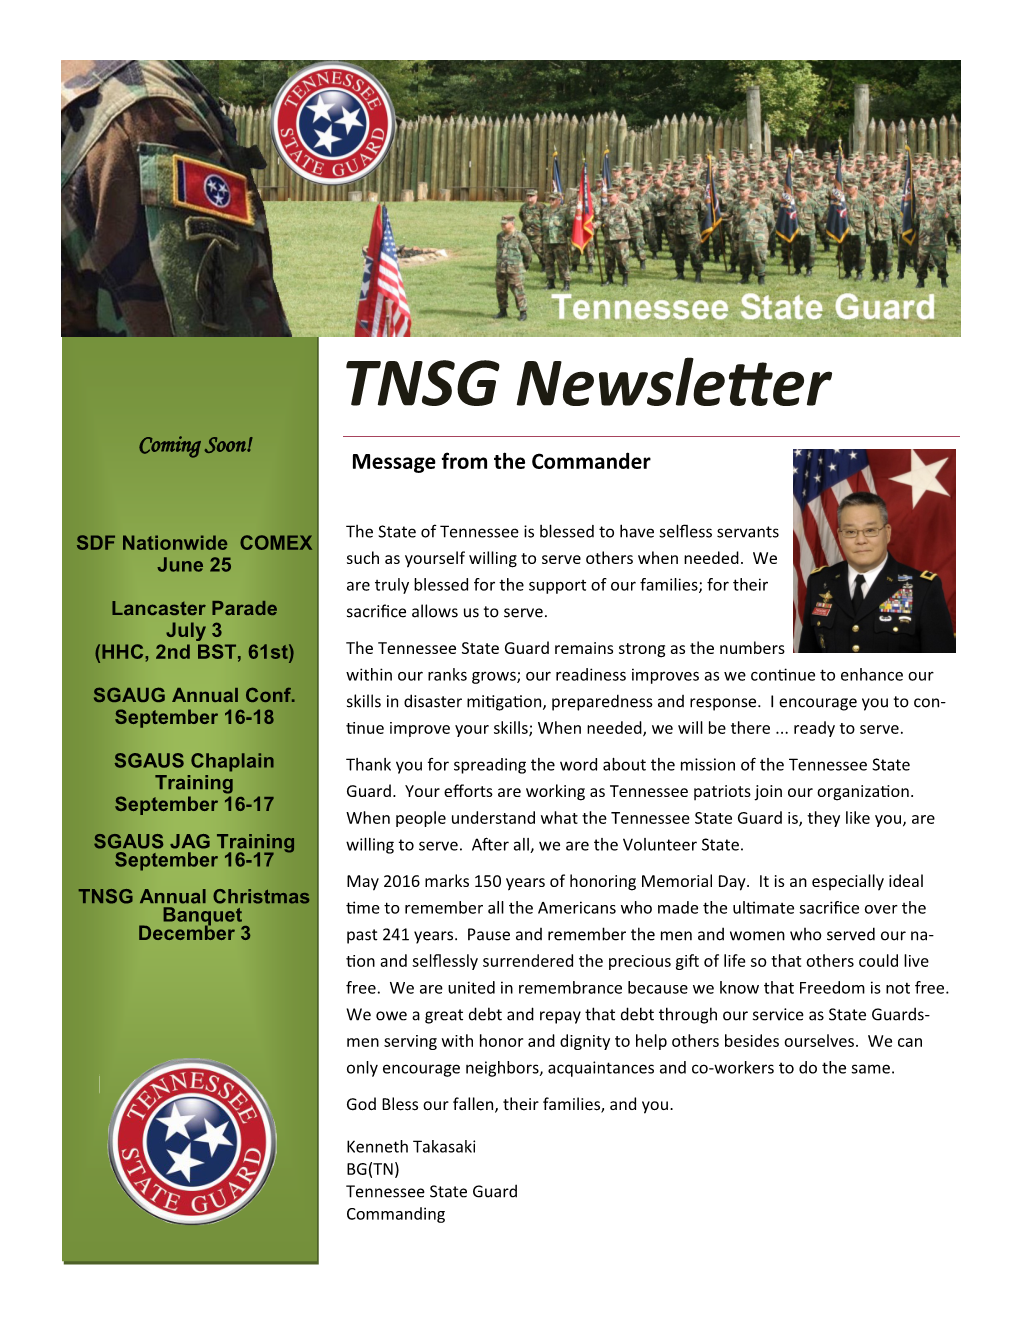 TNSG Newsletter Coming Soon! Message from the Commander